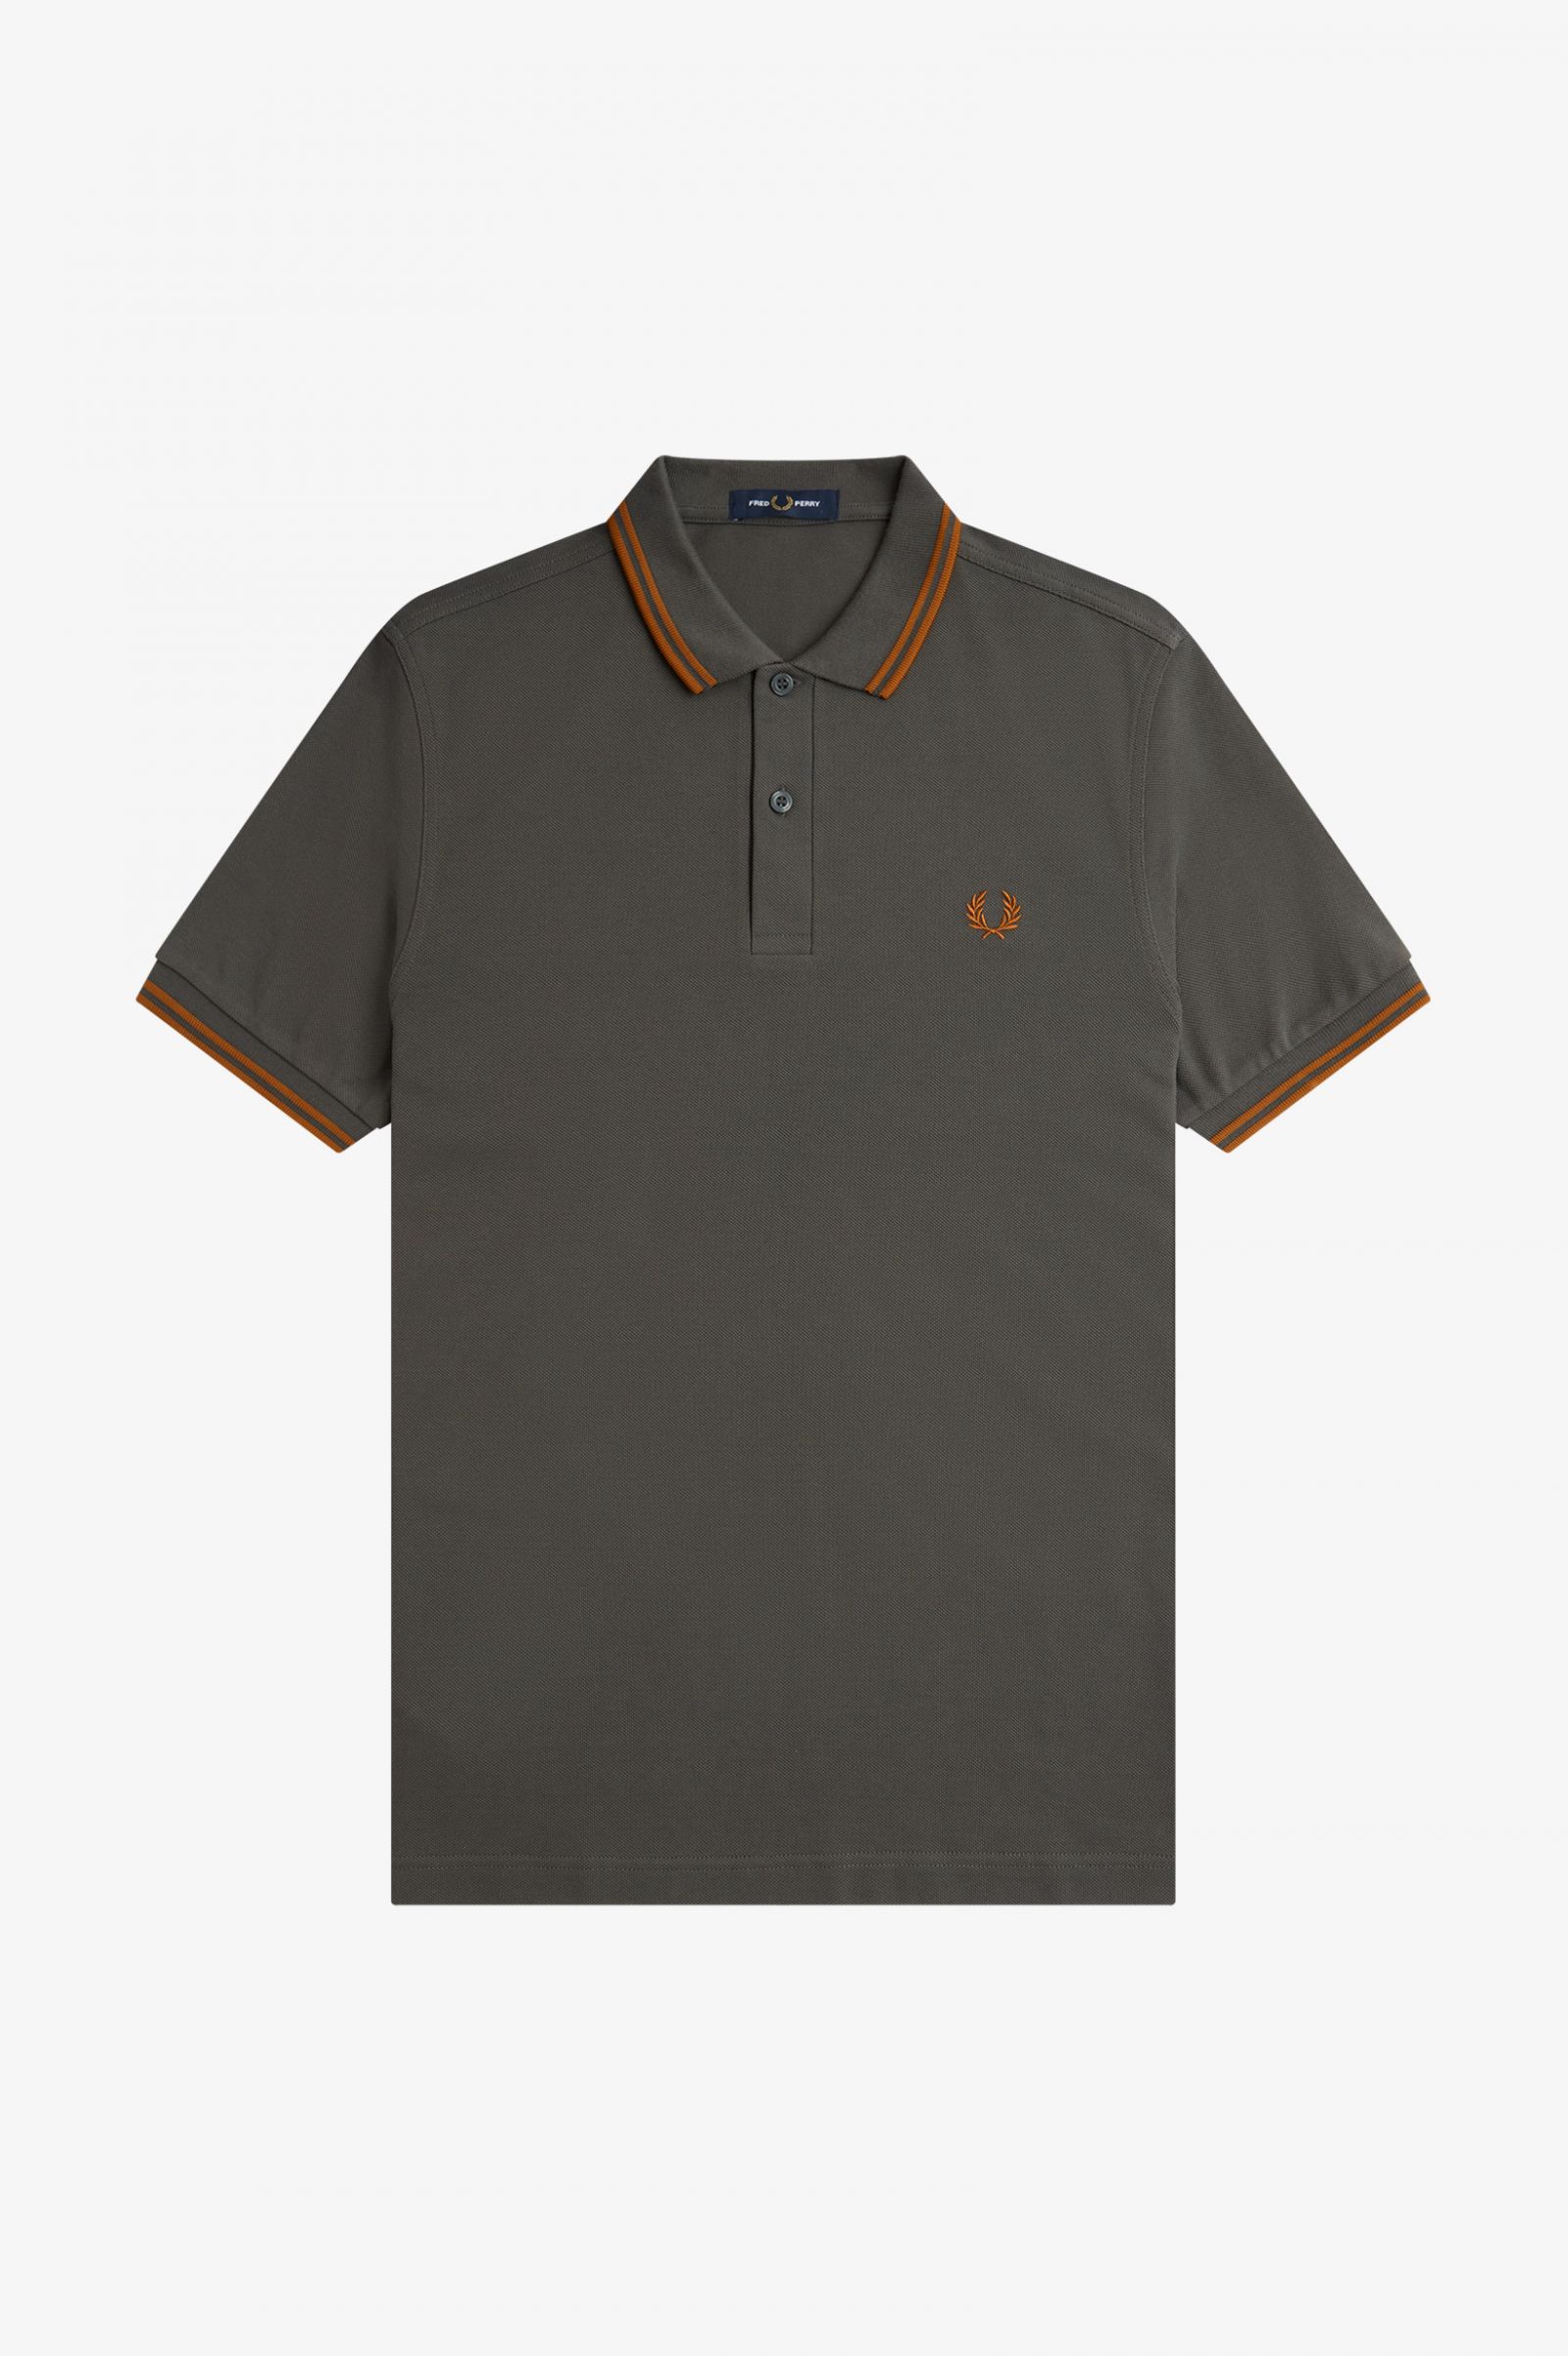 Twin Tipped Fred Perry Shirt in Field Green